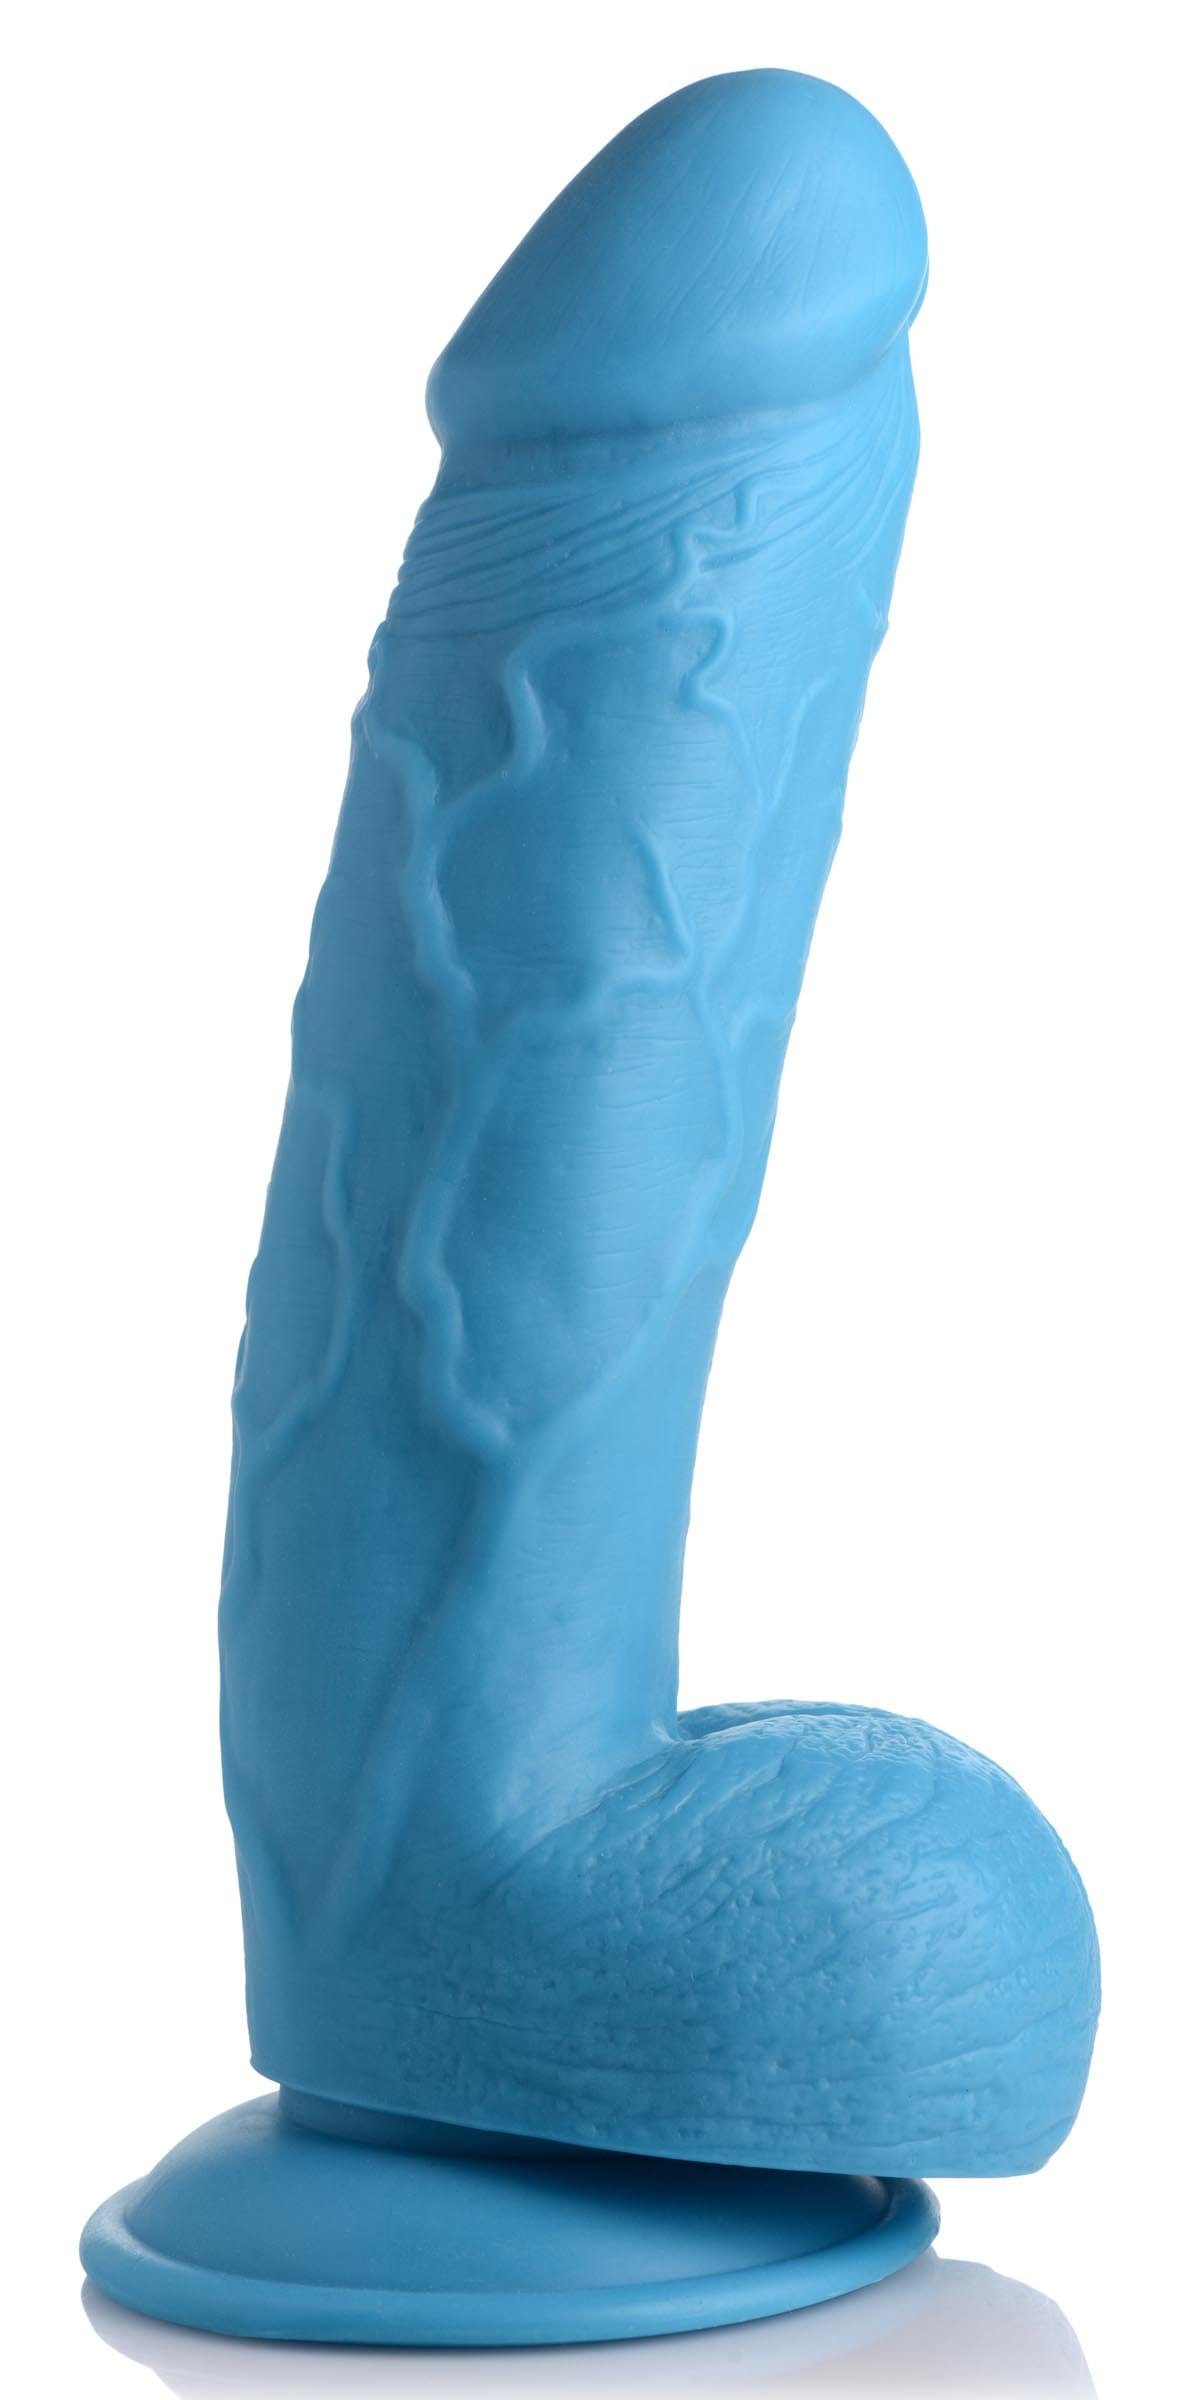 Pop Peckers Realistic Dildo Pop Peckers 8.25" Dildo with Balls at the Haus of Shag